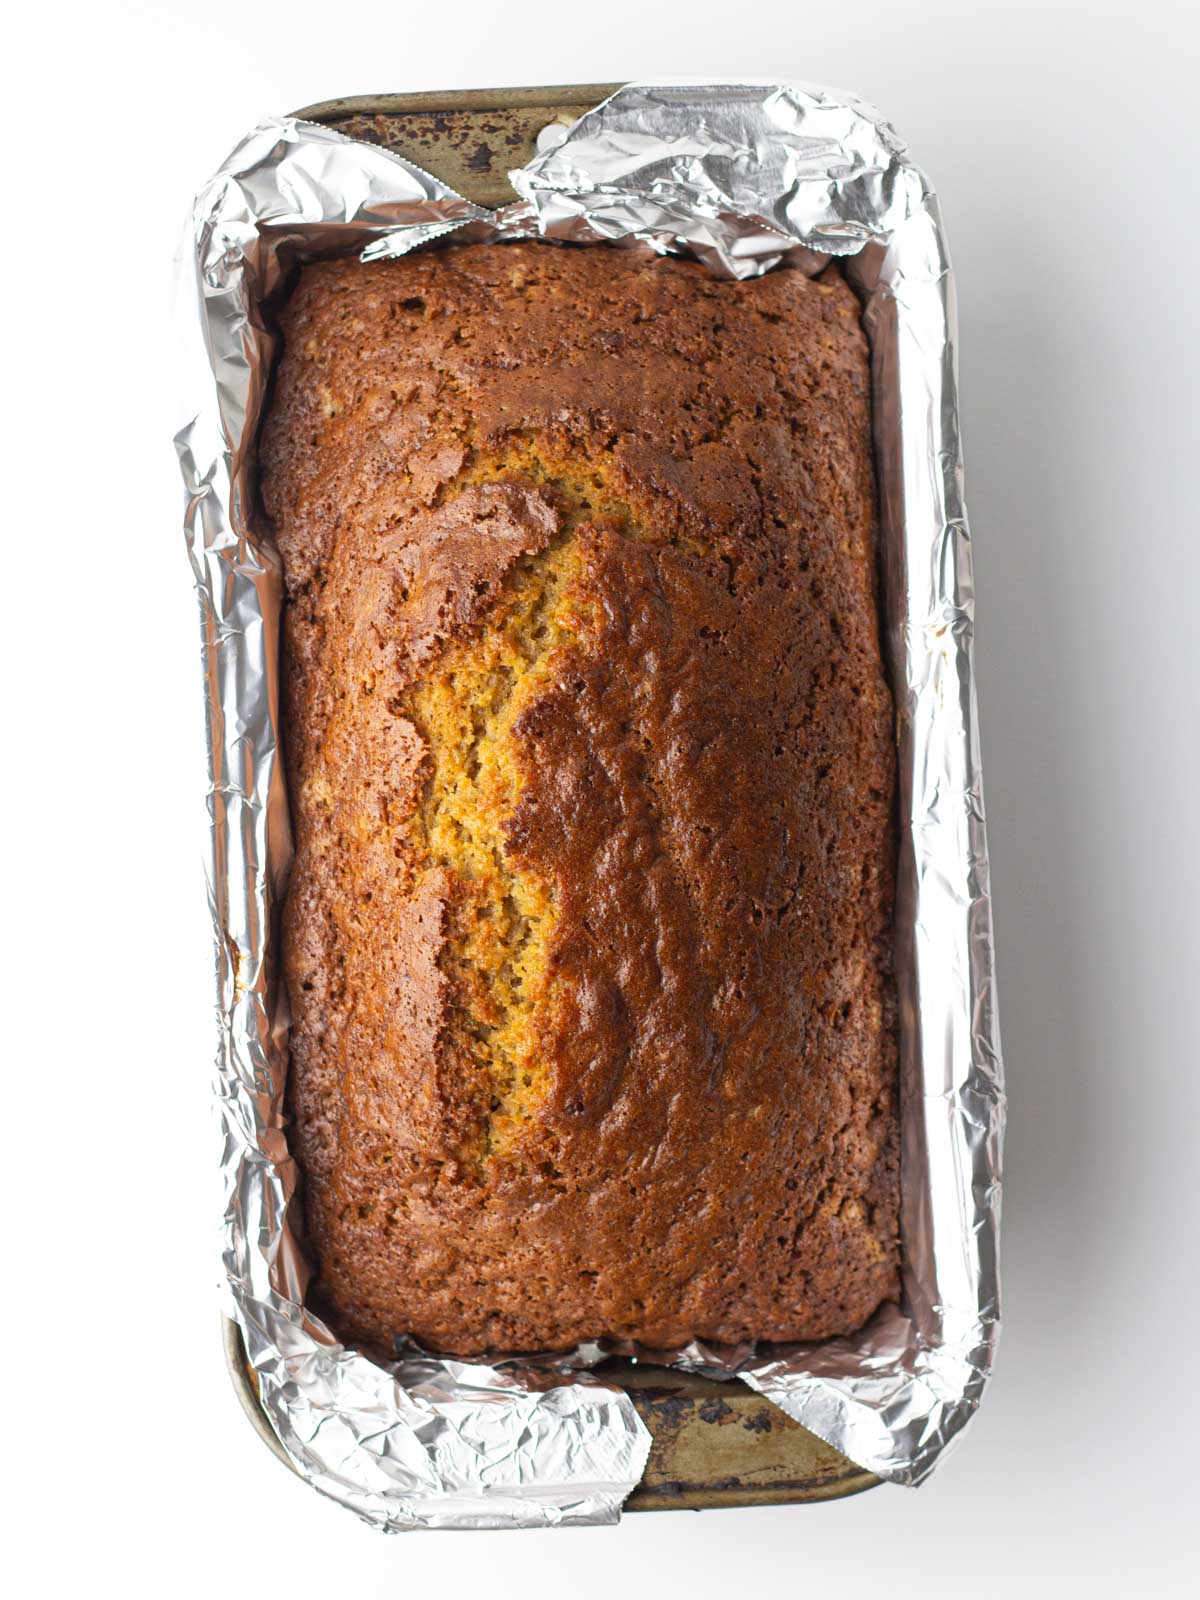 Baked chai bread in the foil lined metal loaf pan.